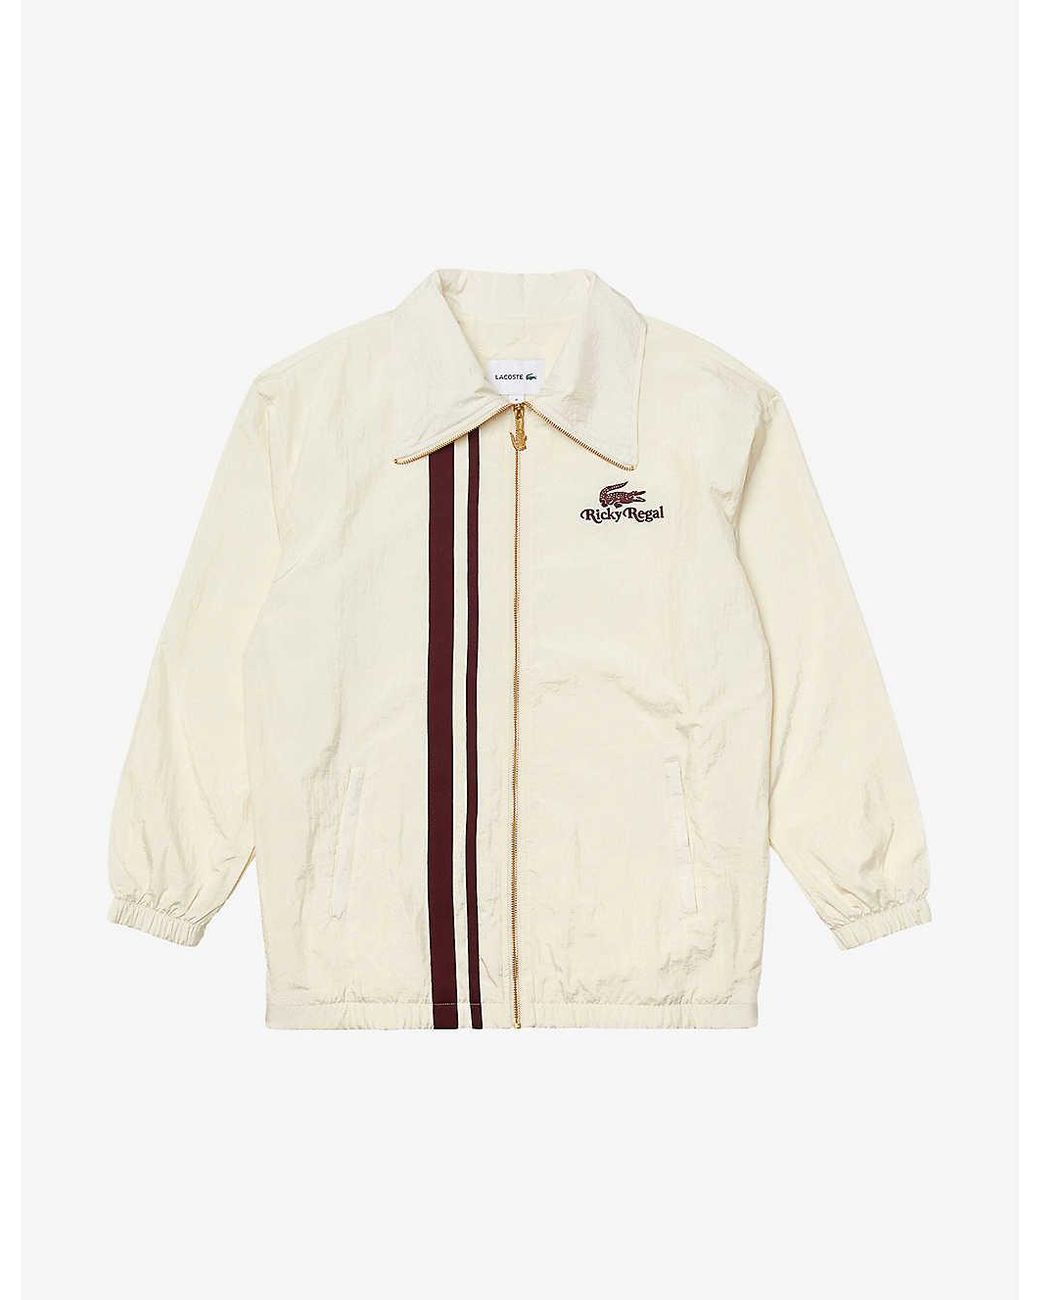 Lacoste X Ricky Regal Striped-trim Woven Coach Jacket in Natural for Men |  Lyst Australia